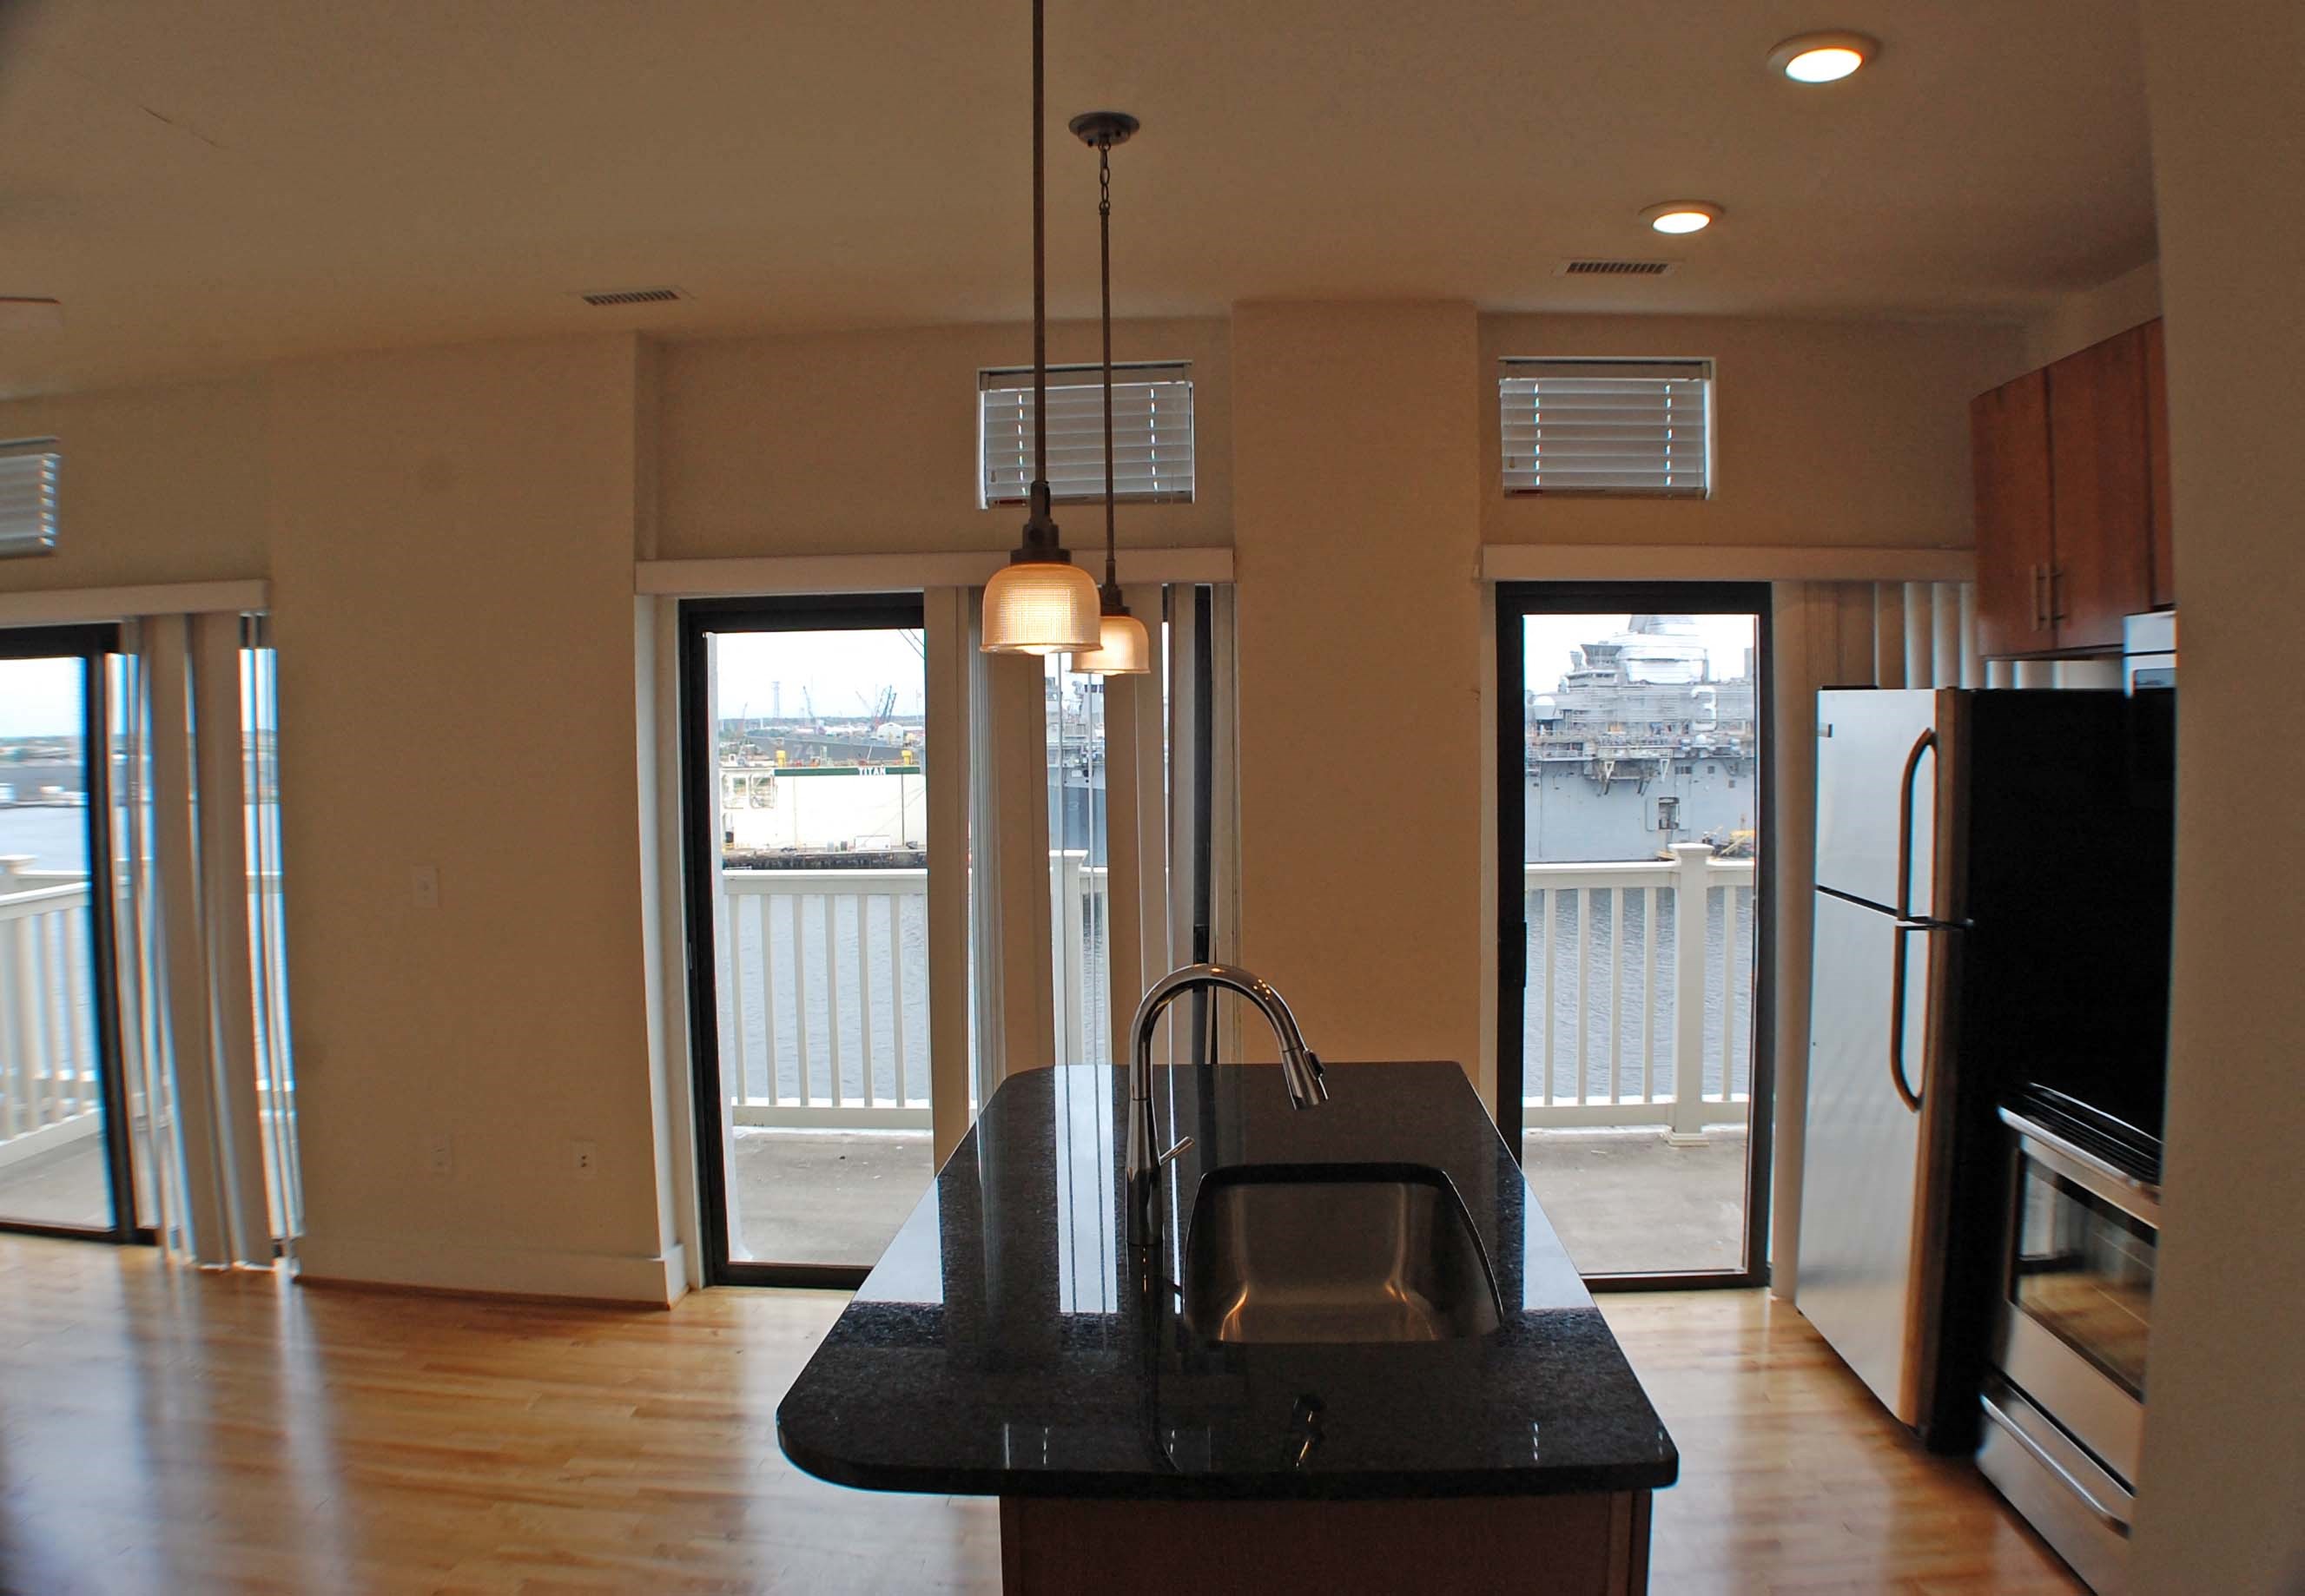 The Seaboard Building Apartments 1 High Street Portsmouth VA RentCafe